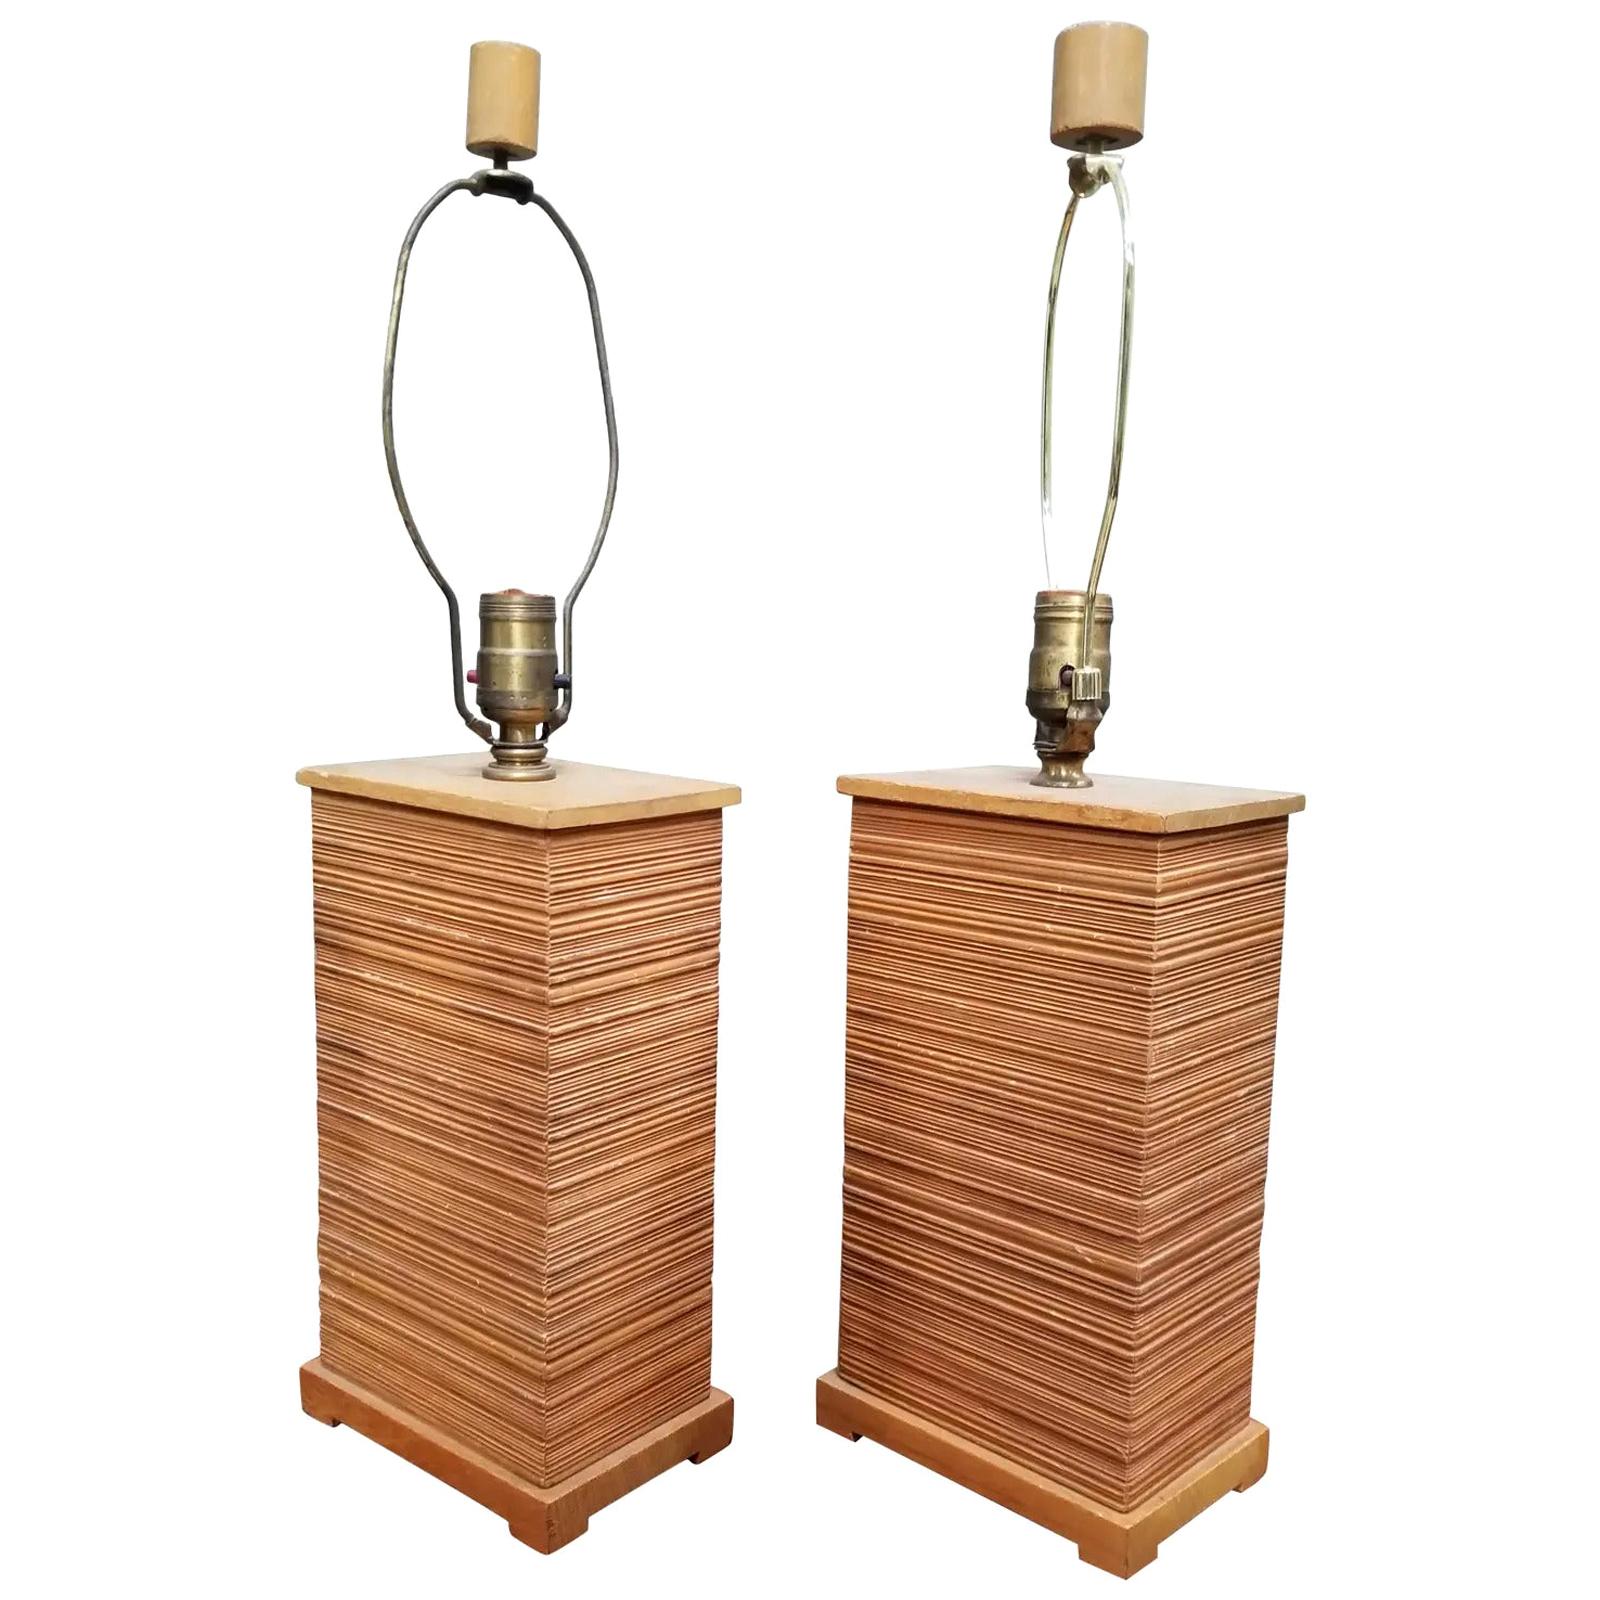 Paul Frankl Combed Fir Table Lamps, a Pair